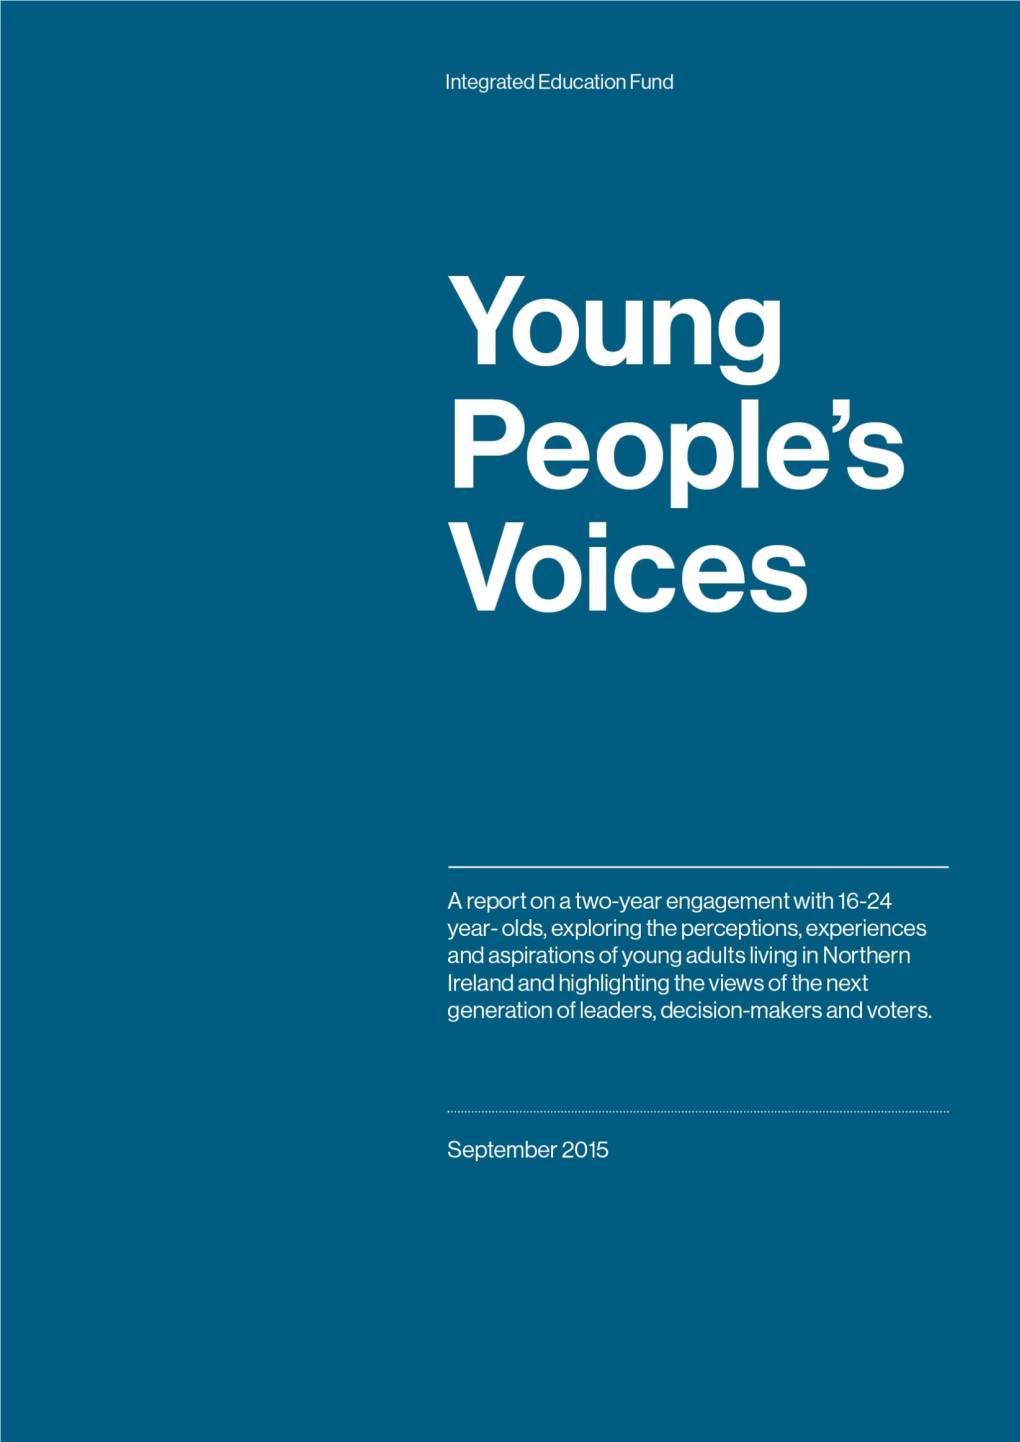 Young People's Voices Report